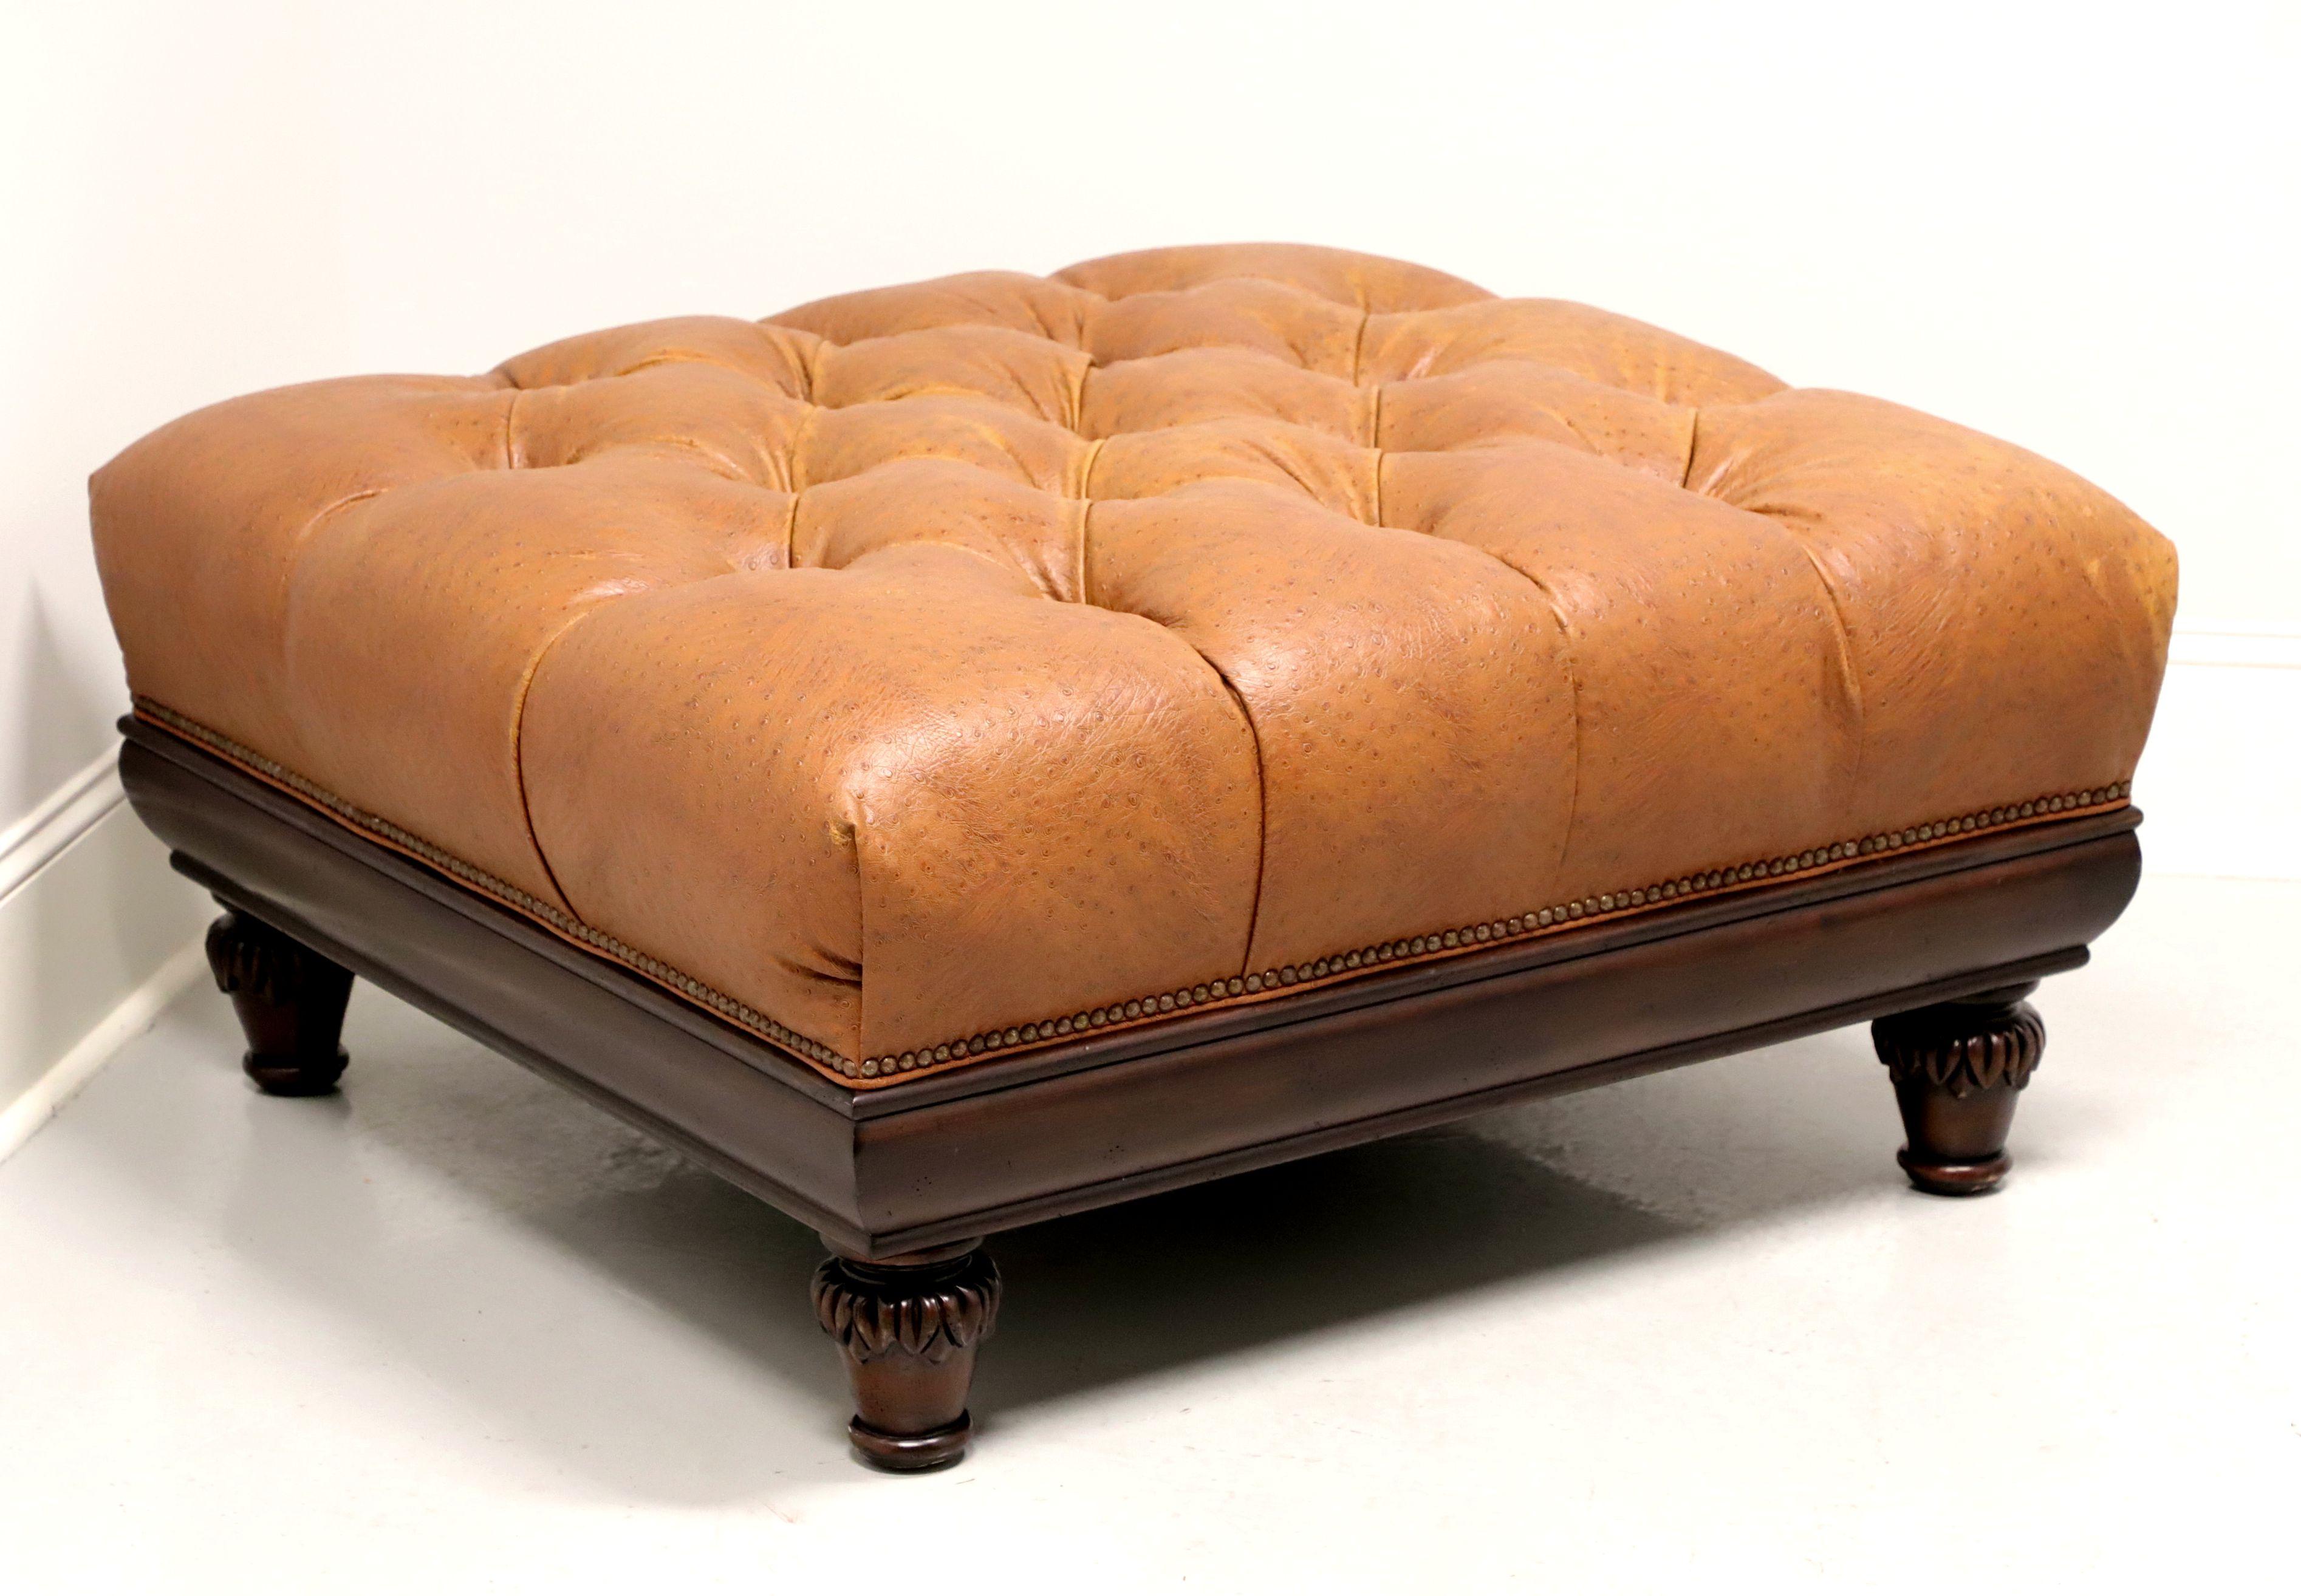 HANCOCK & MOORE Tufted Leather Regency Large Square Ottoman 3